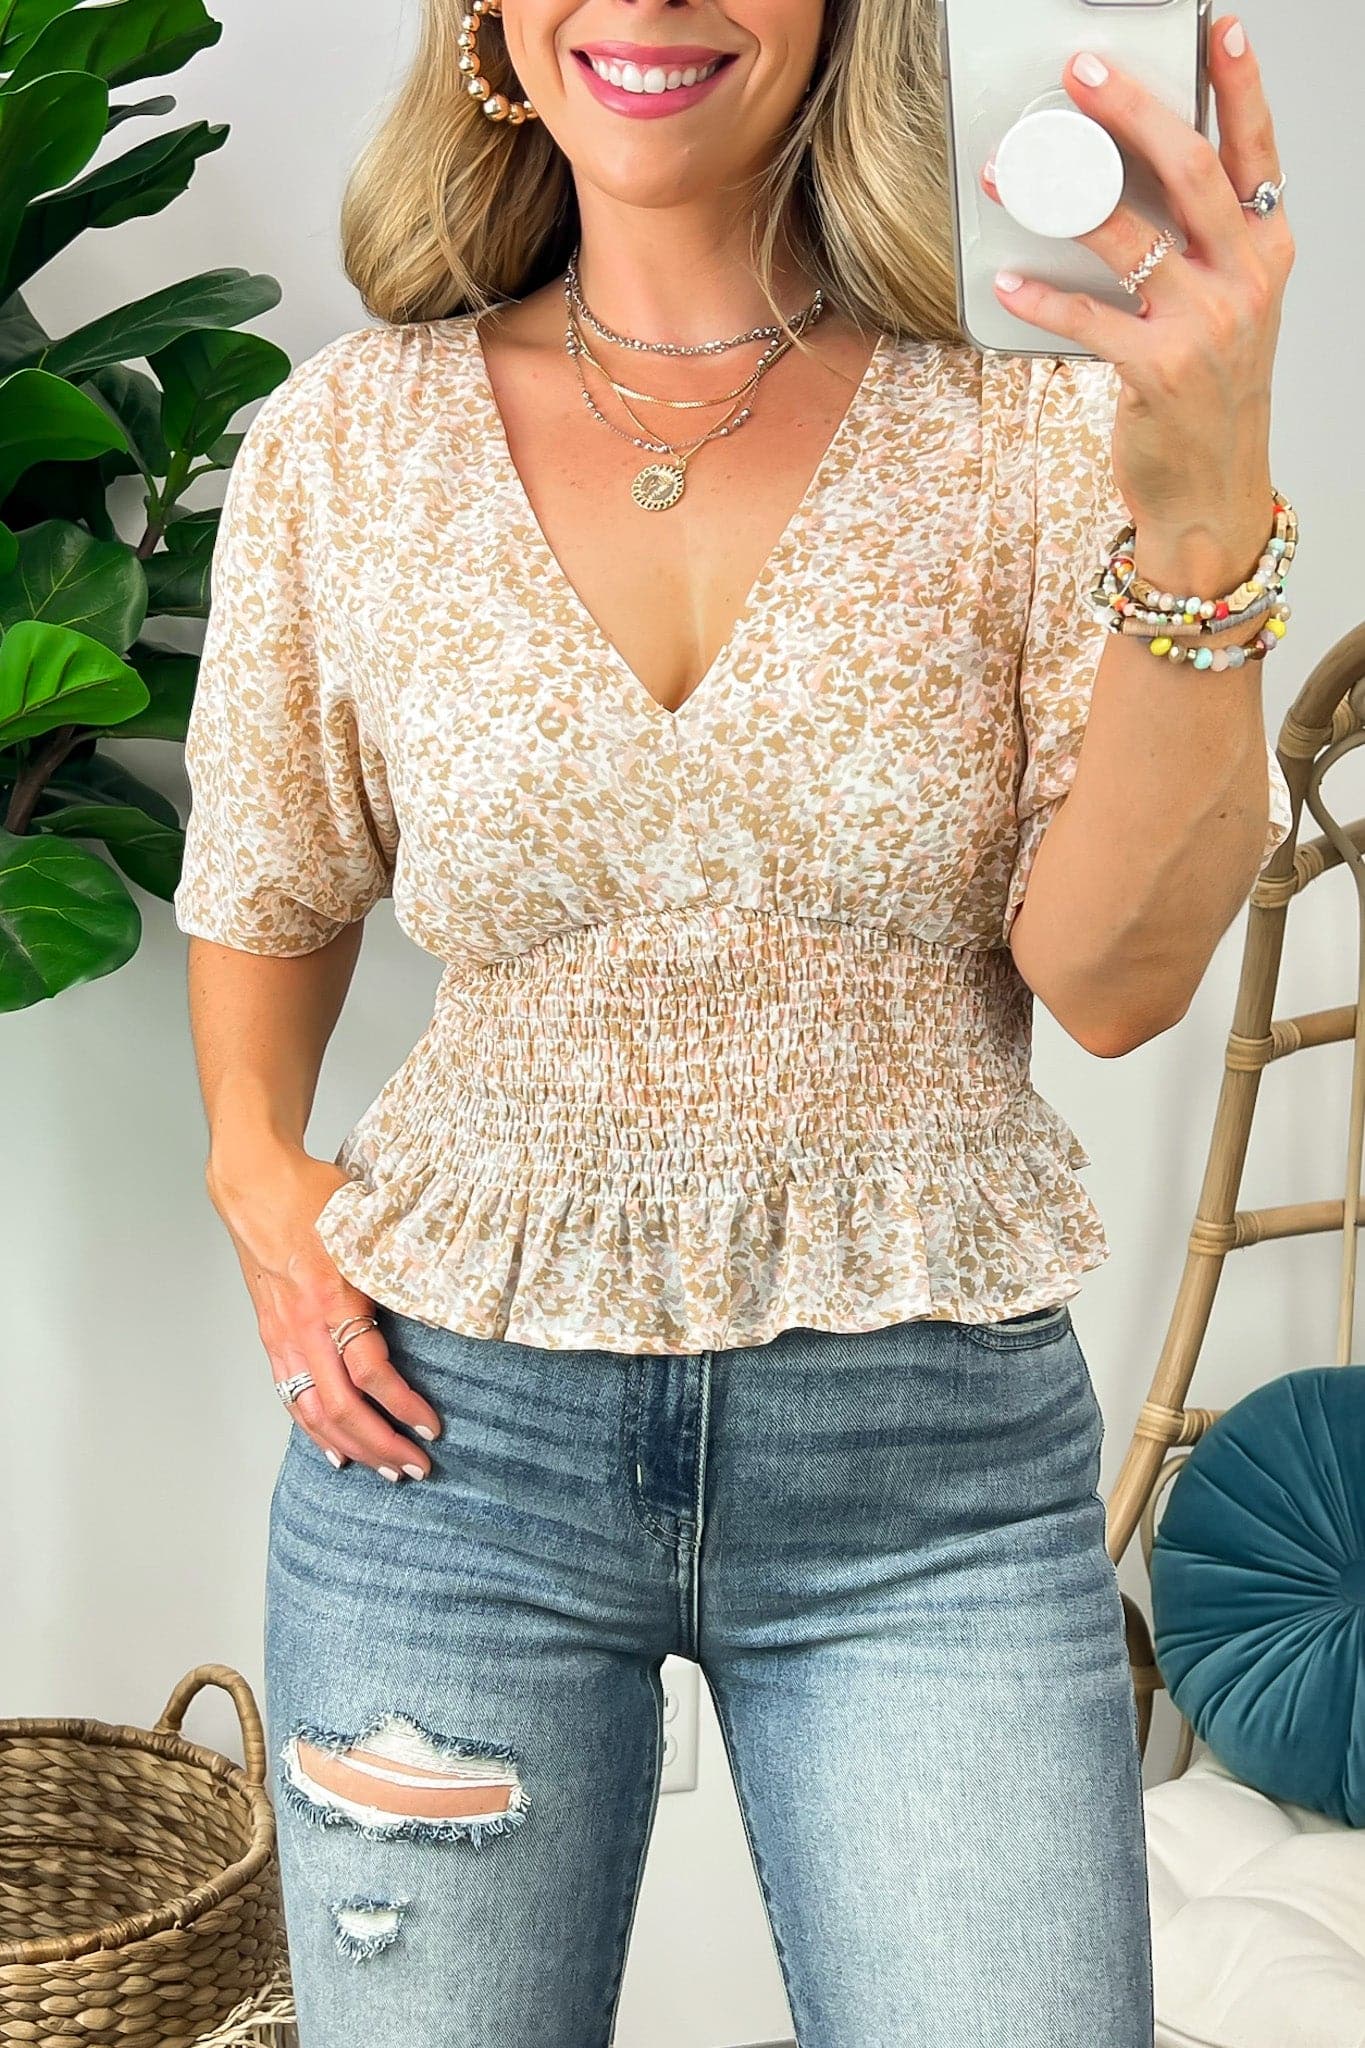  Unique Impression Floral Smocked Top - FINAL SALE - Madison and Mallory